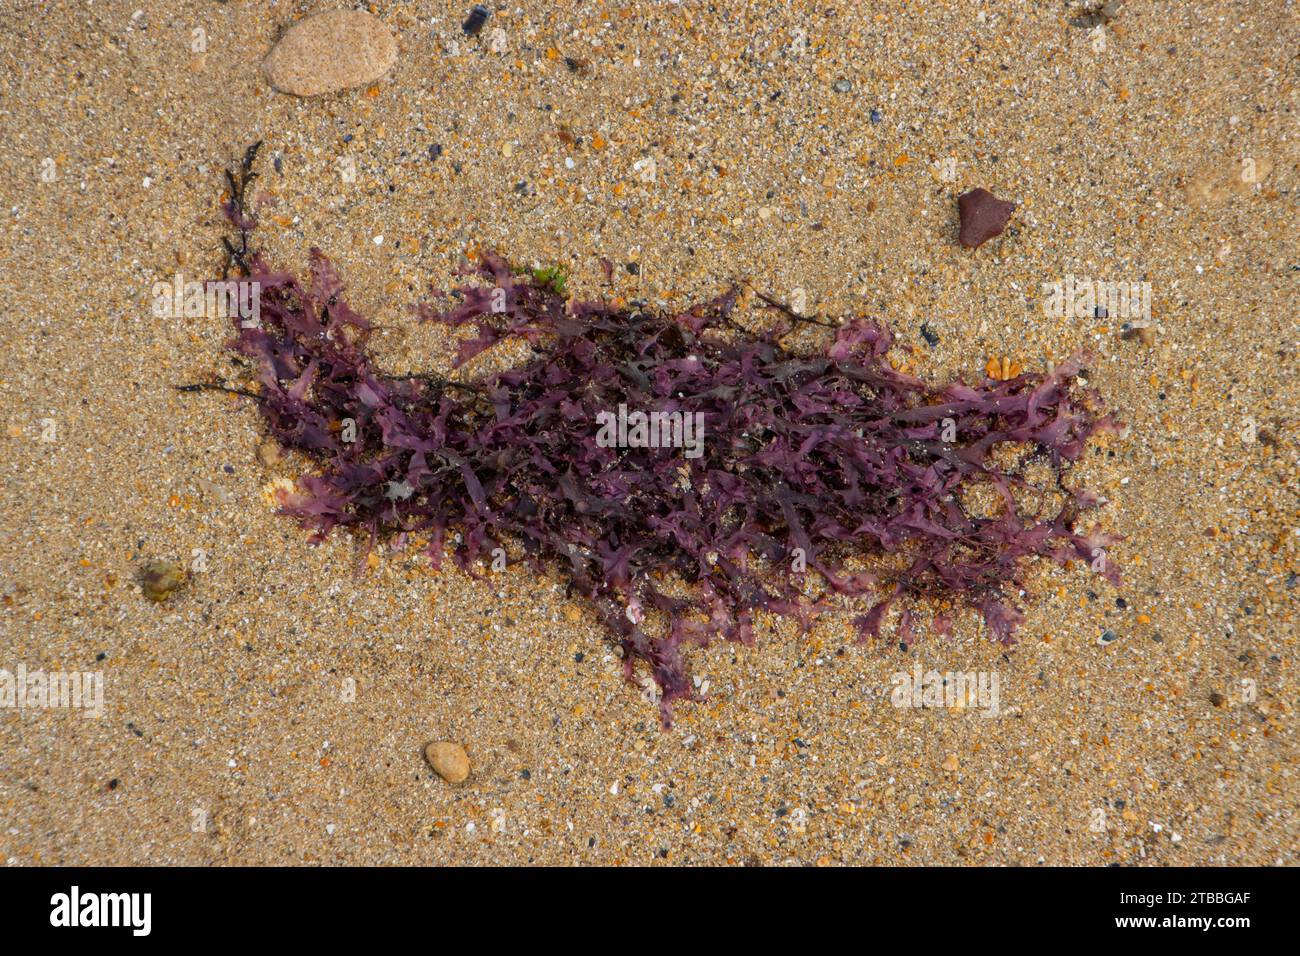 Close up of red algae lying in the sand at the beach Stock Photo